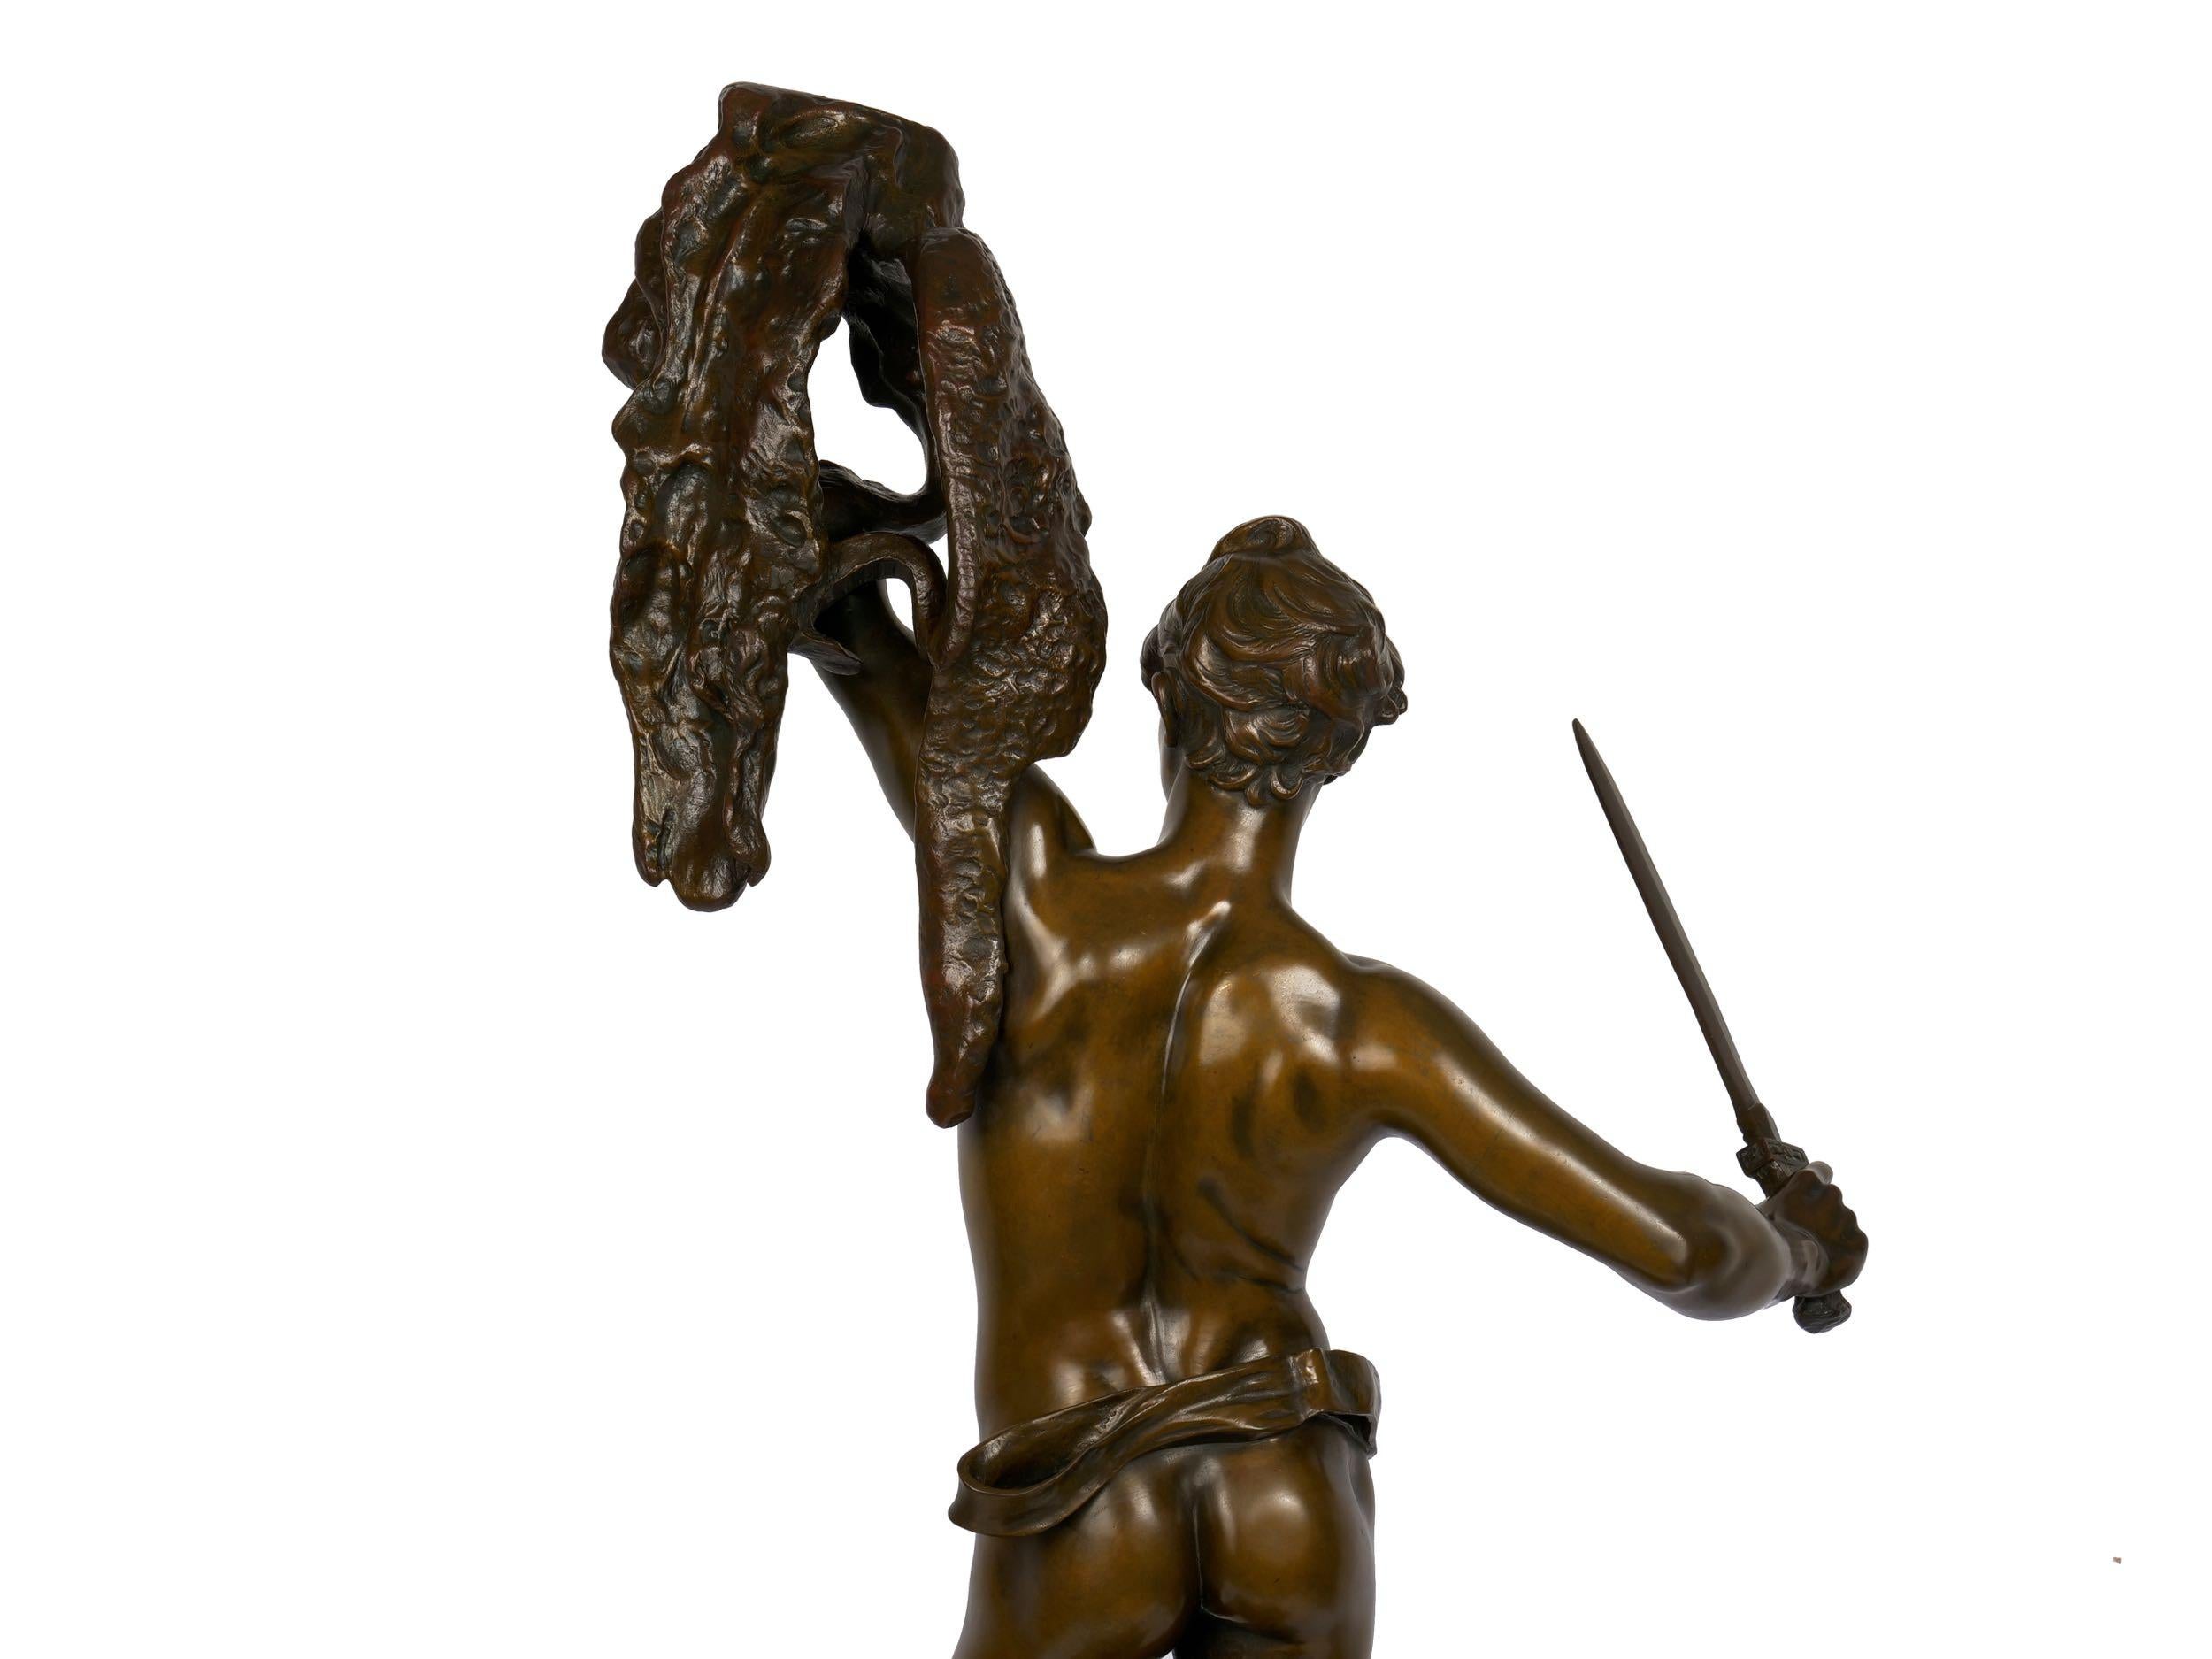 “Jason and the Golden Fleece” '1875' French Bronze Sculpture by Lanson & Susse 4